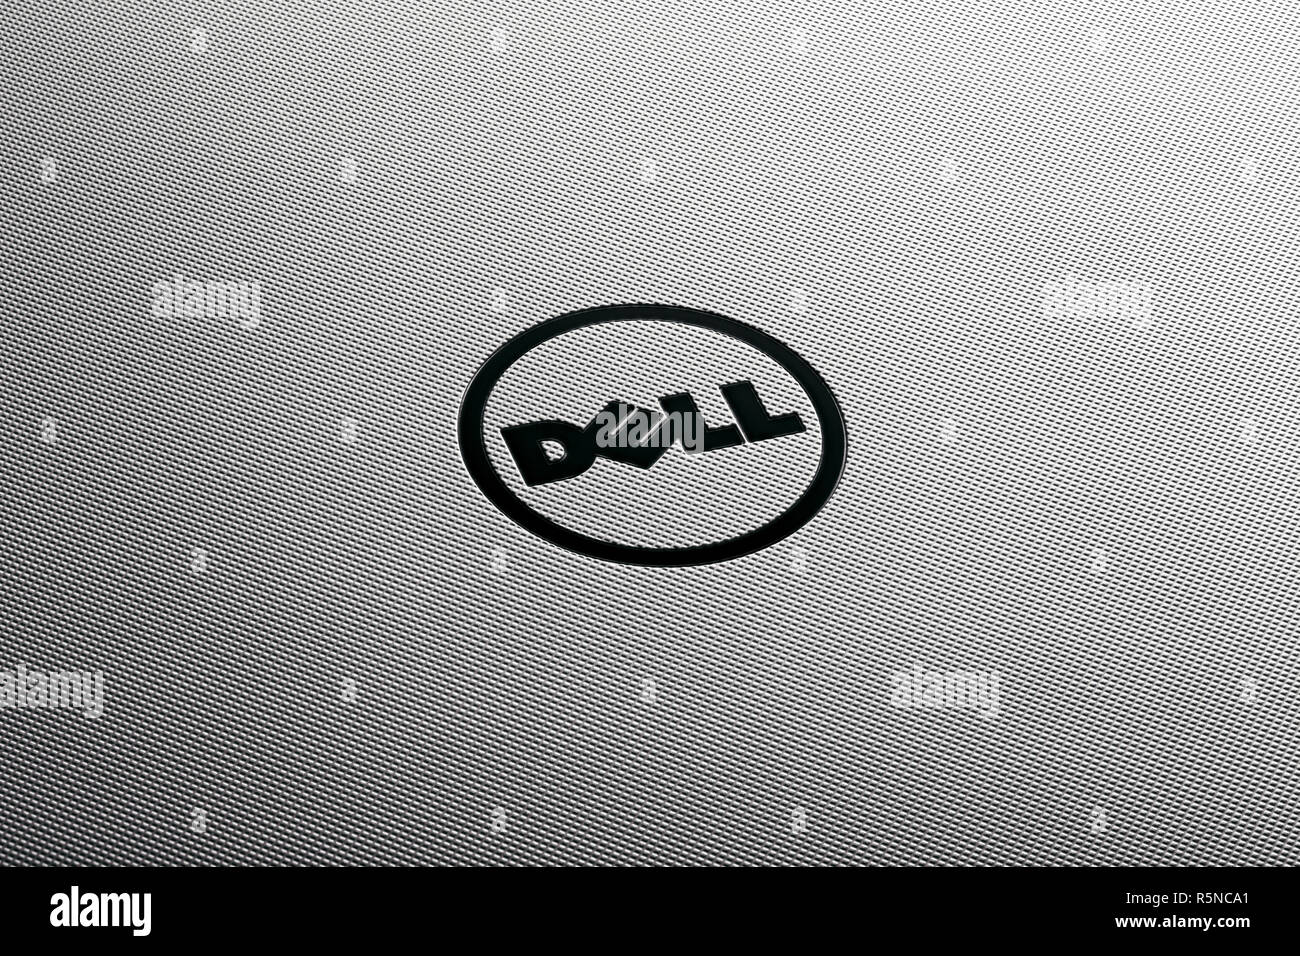 Close up Dell logo on the textured gray metal surface of a laptop cover. Stock Photo